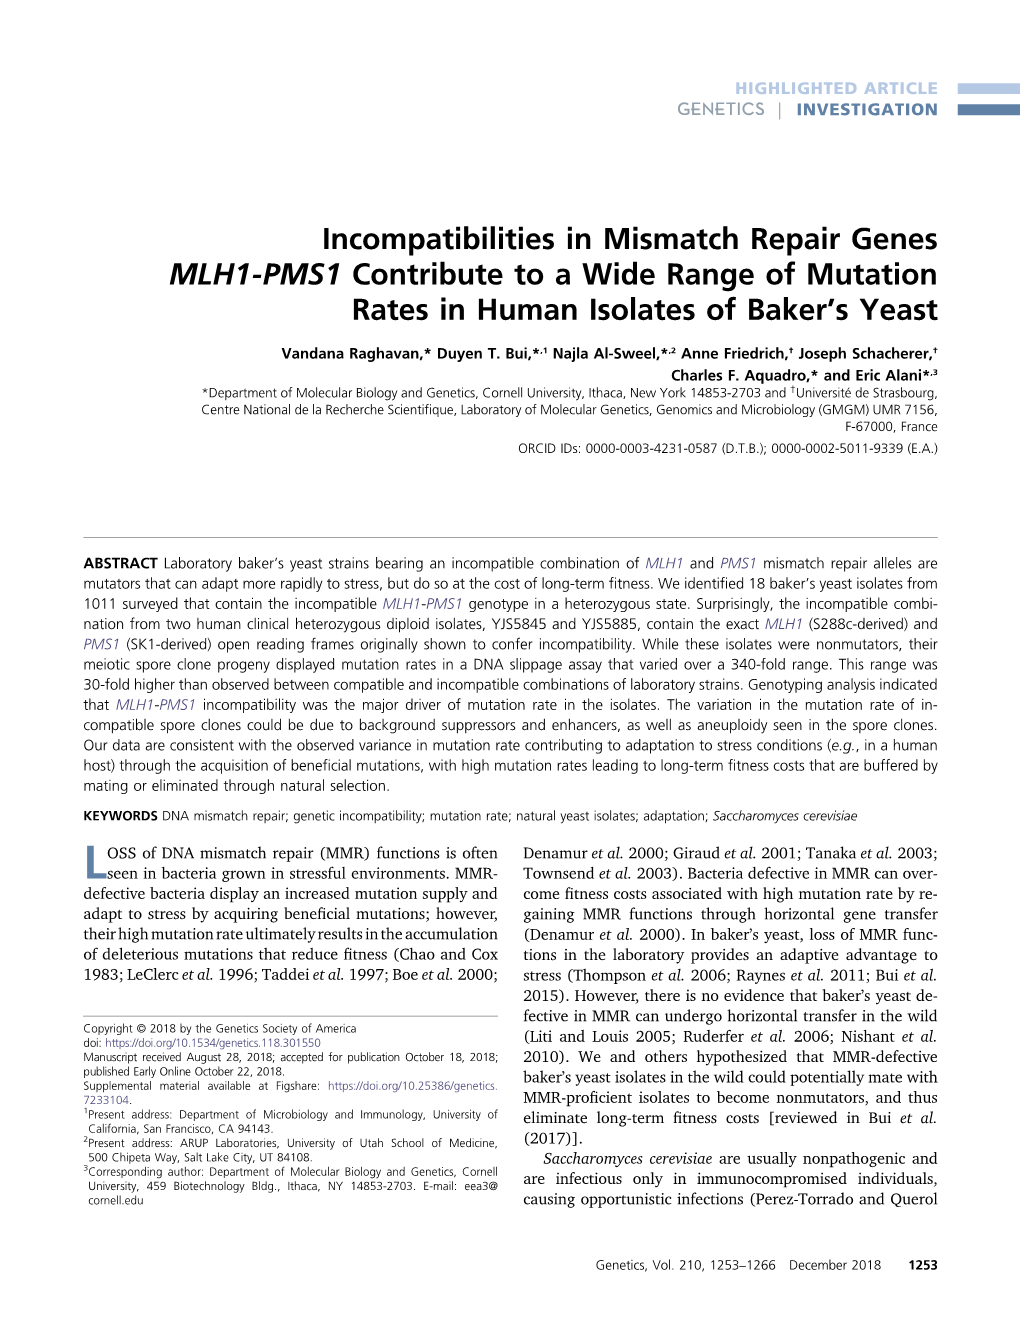 Incompatibilities in Mismatch Repair Genes MLH1-PMS1 Contribute to a Wide Range of Mutation Rates in Human Isolates of Baker’S Yeast